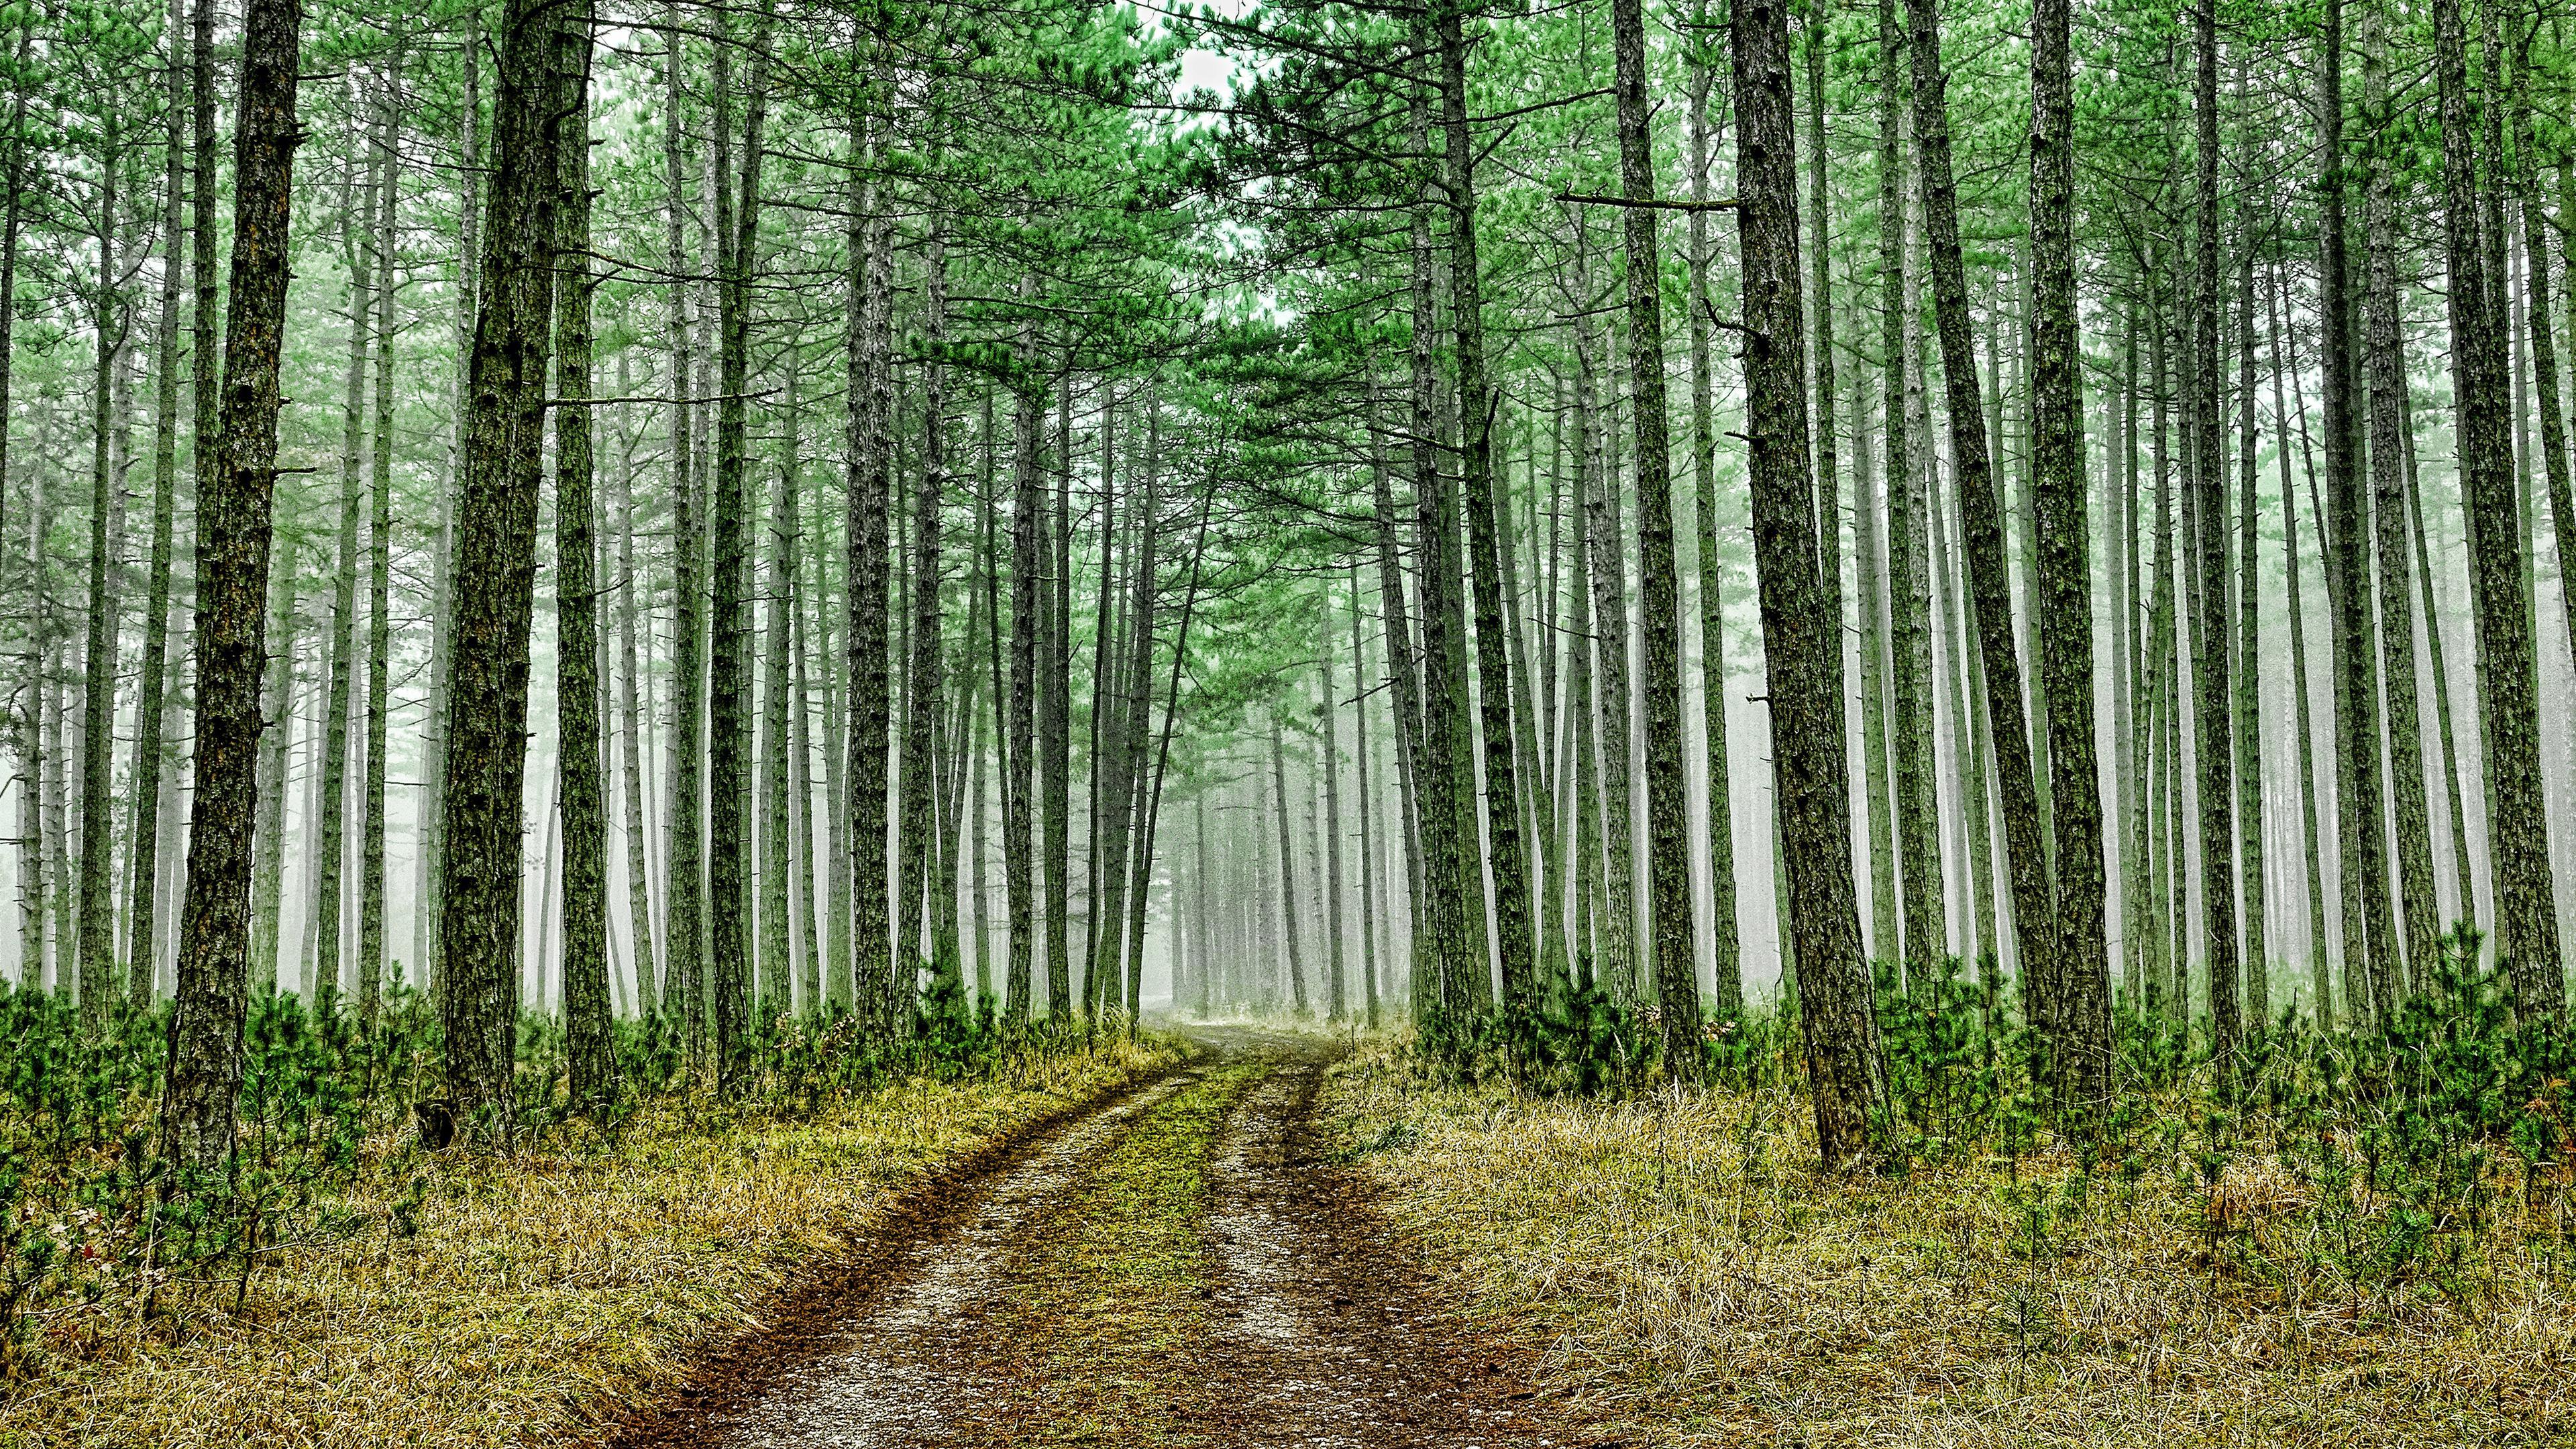 Green Forest Road 4K Wallpaper x 2160 px